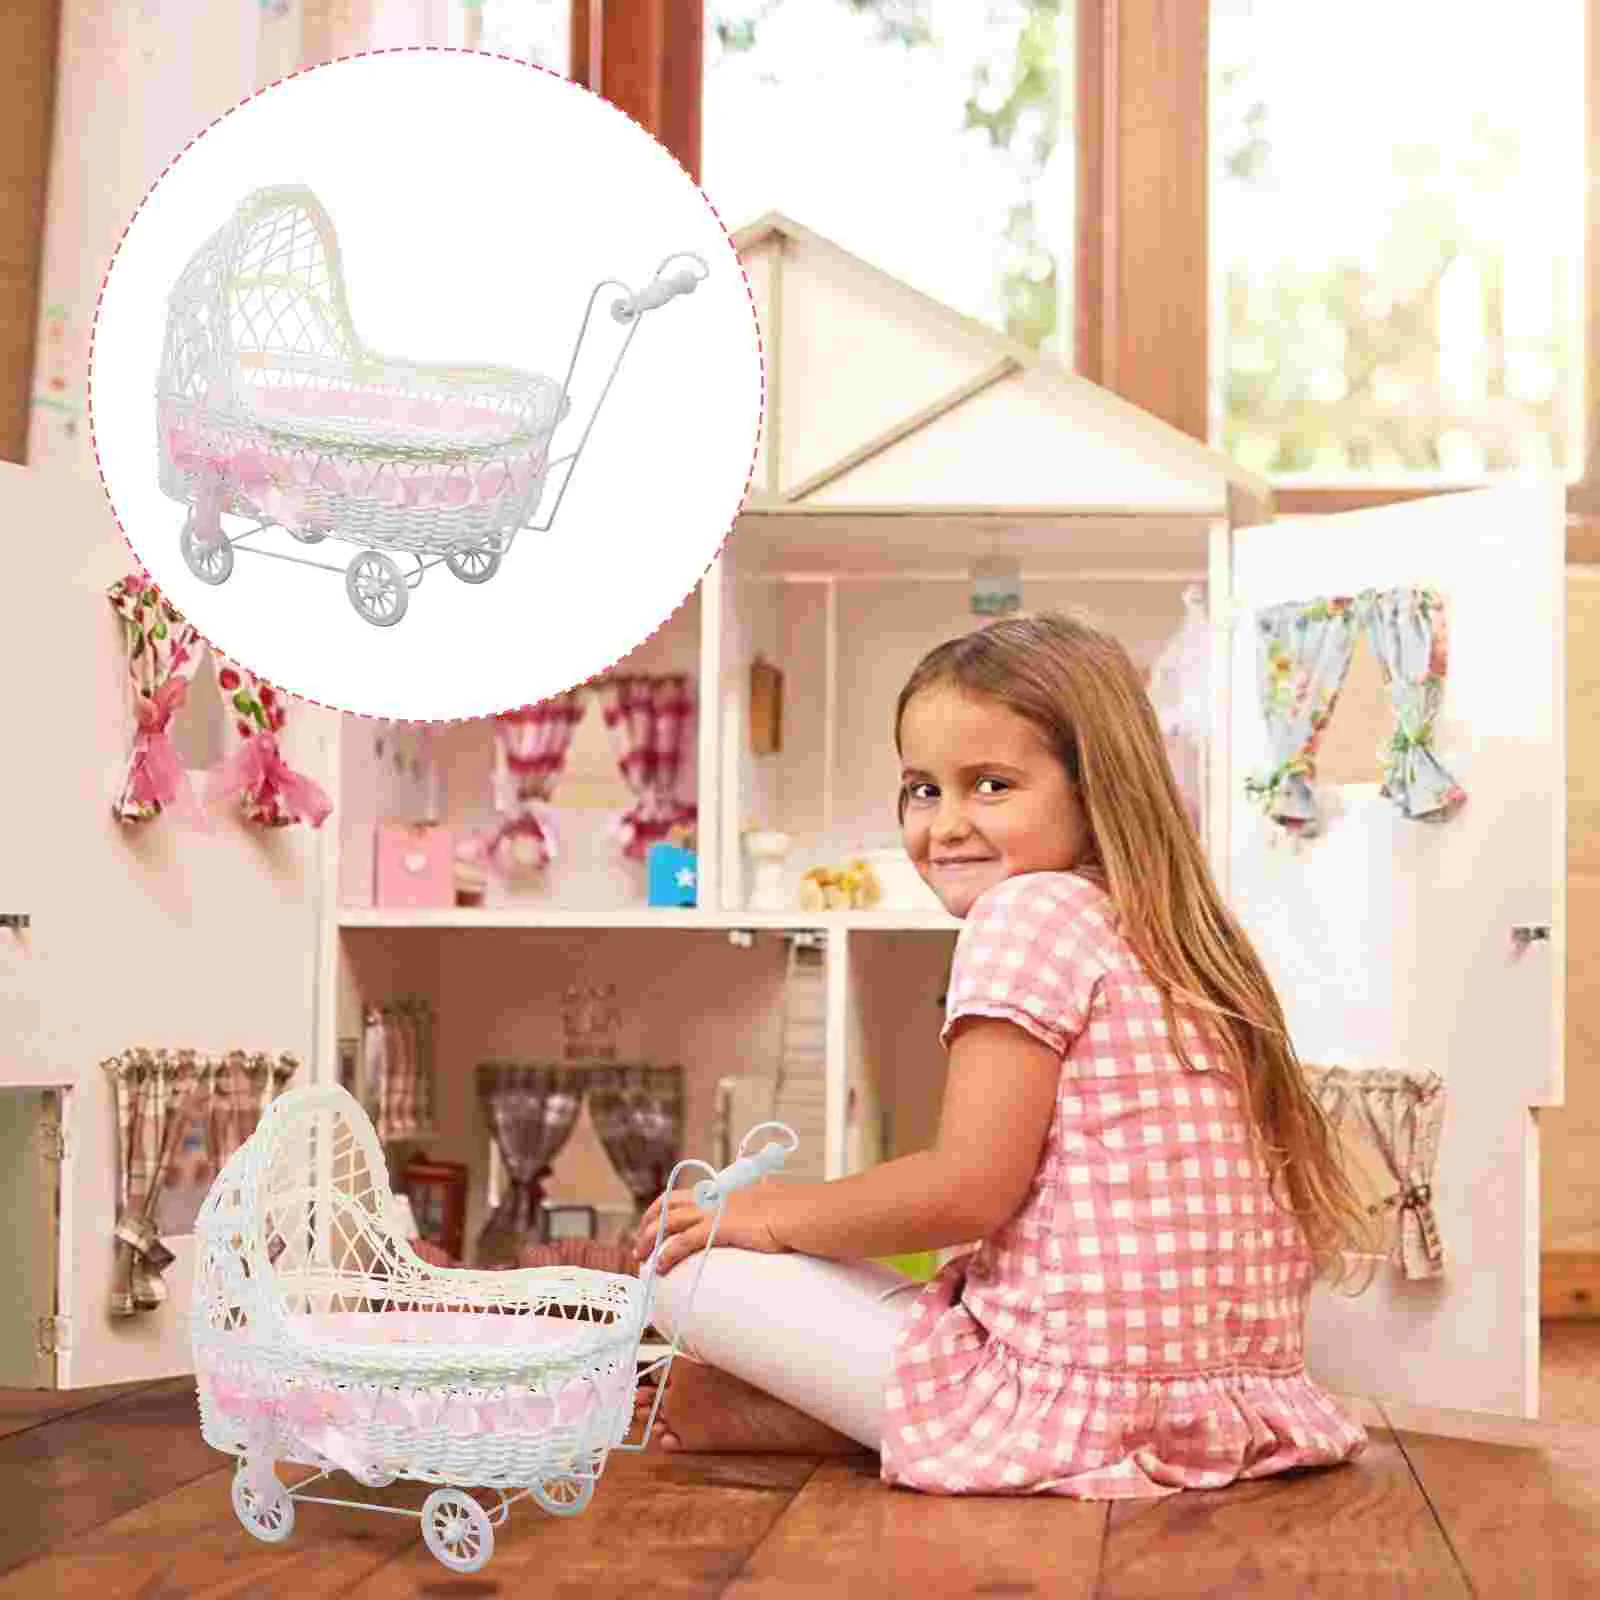 

Basket Flower Box Baby Decorations Party Candy Wedding Baskets Woven Cutie Mini Favor Baptism Storage Shower Cart Favors Gift